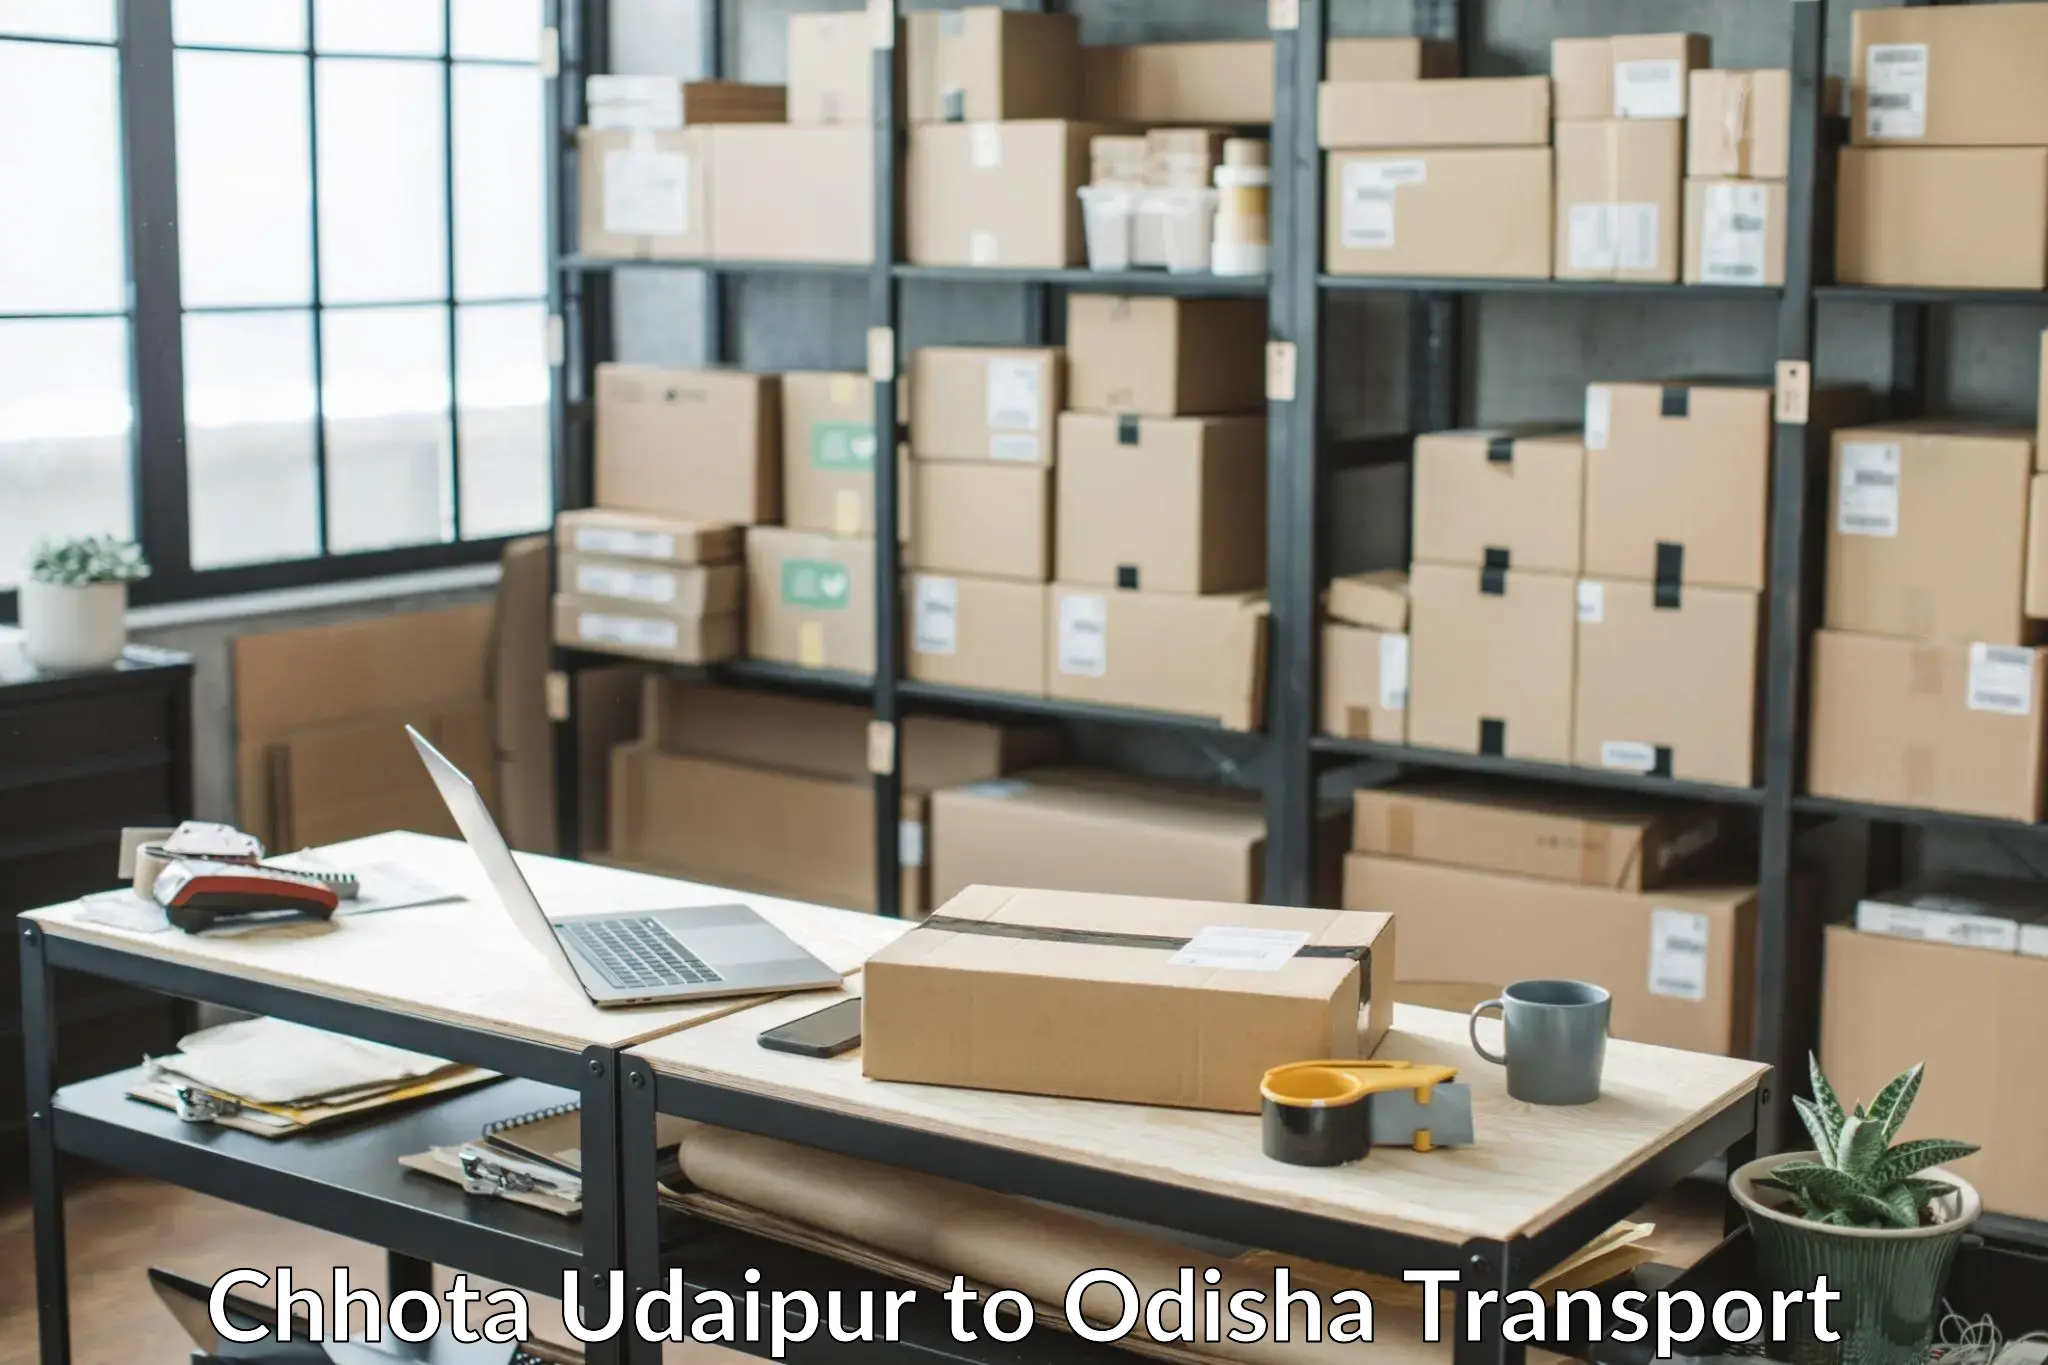 Goods delivery service Chhota Udaipur to Udala